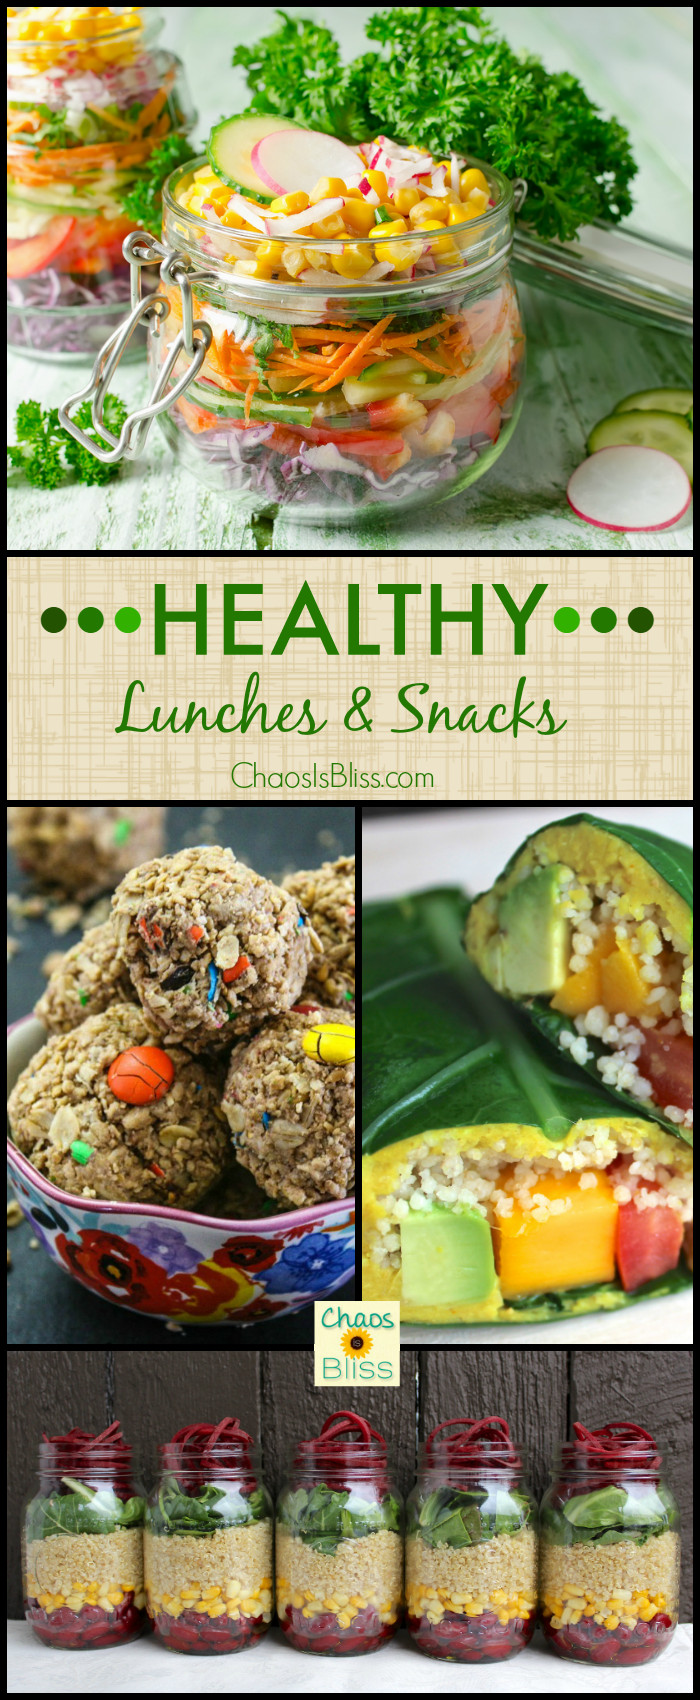 Healthy Snacks For Work Lunch
 Healthy Lunches & Snacks when you Work from Home